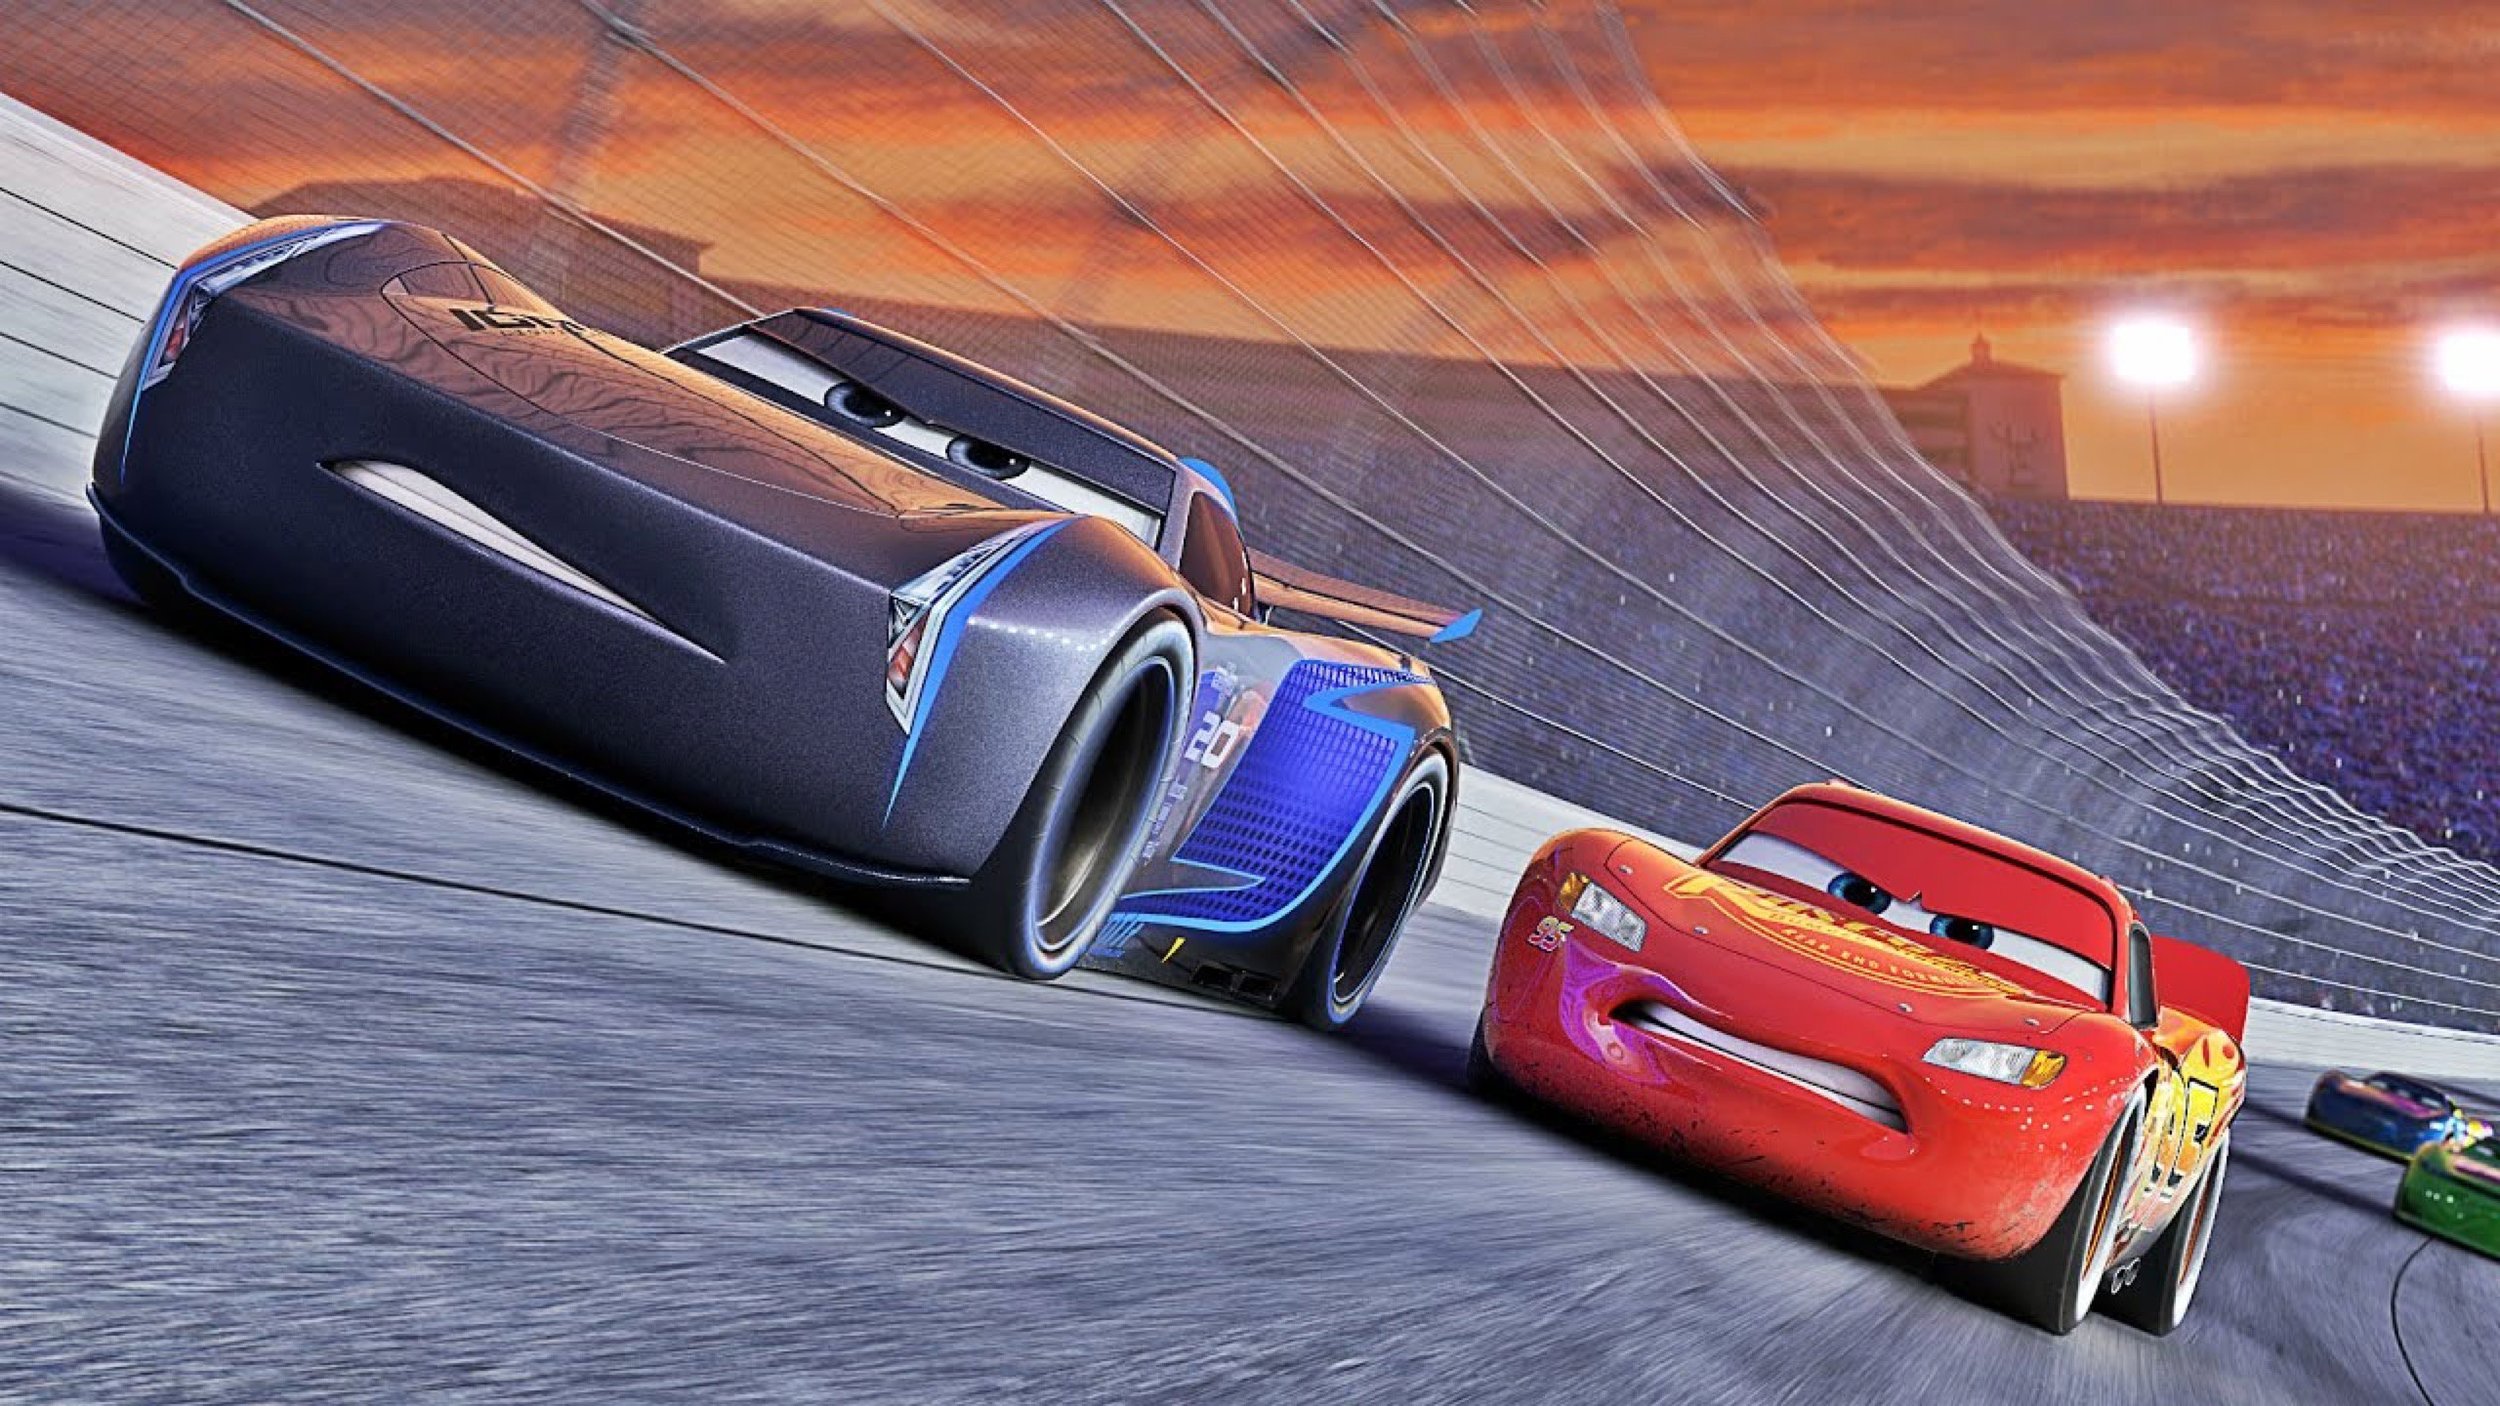 MOVIE REVIEW: Cars 3 — Every Movie Has a Lesson